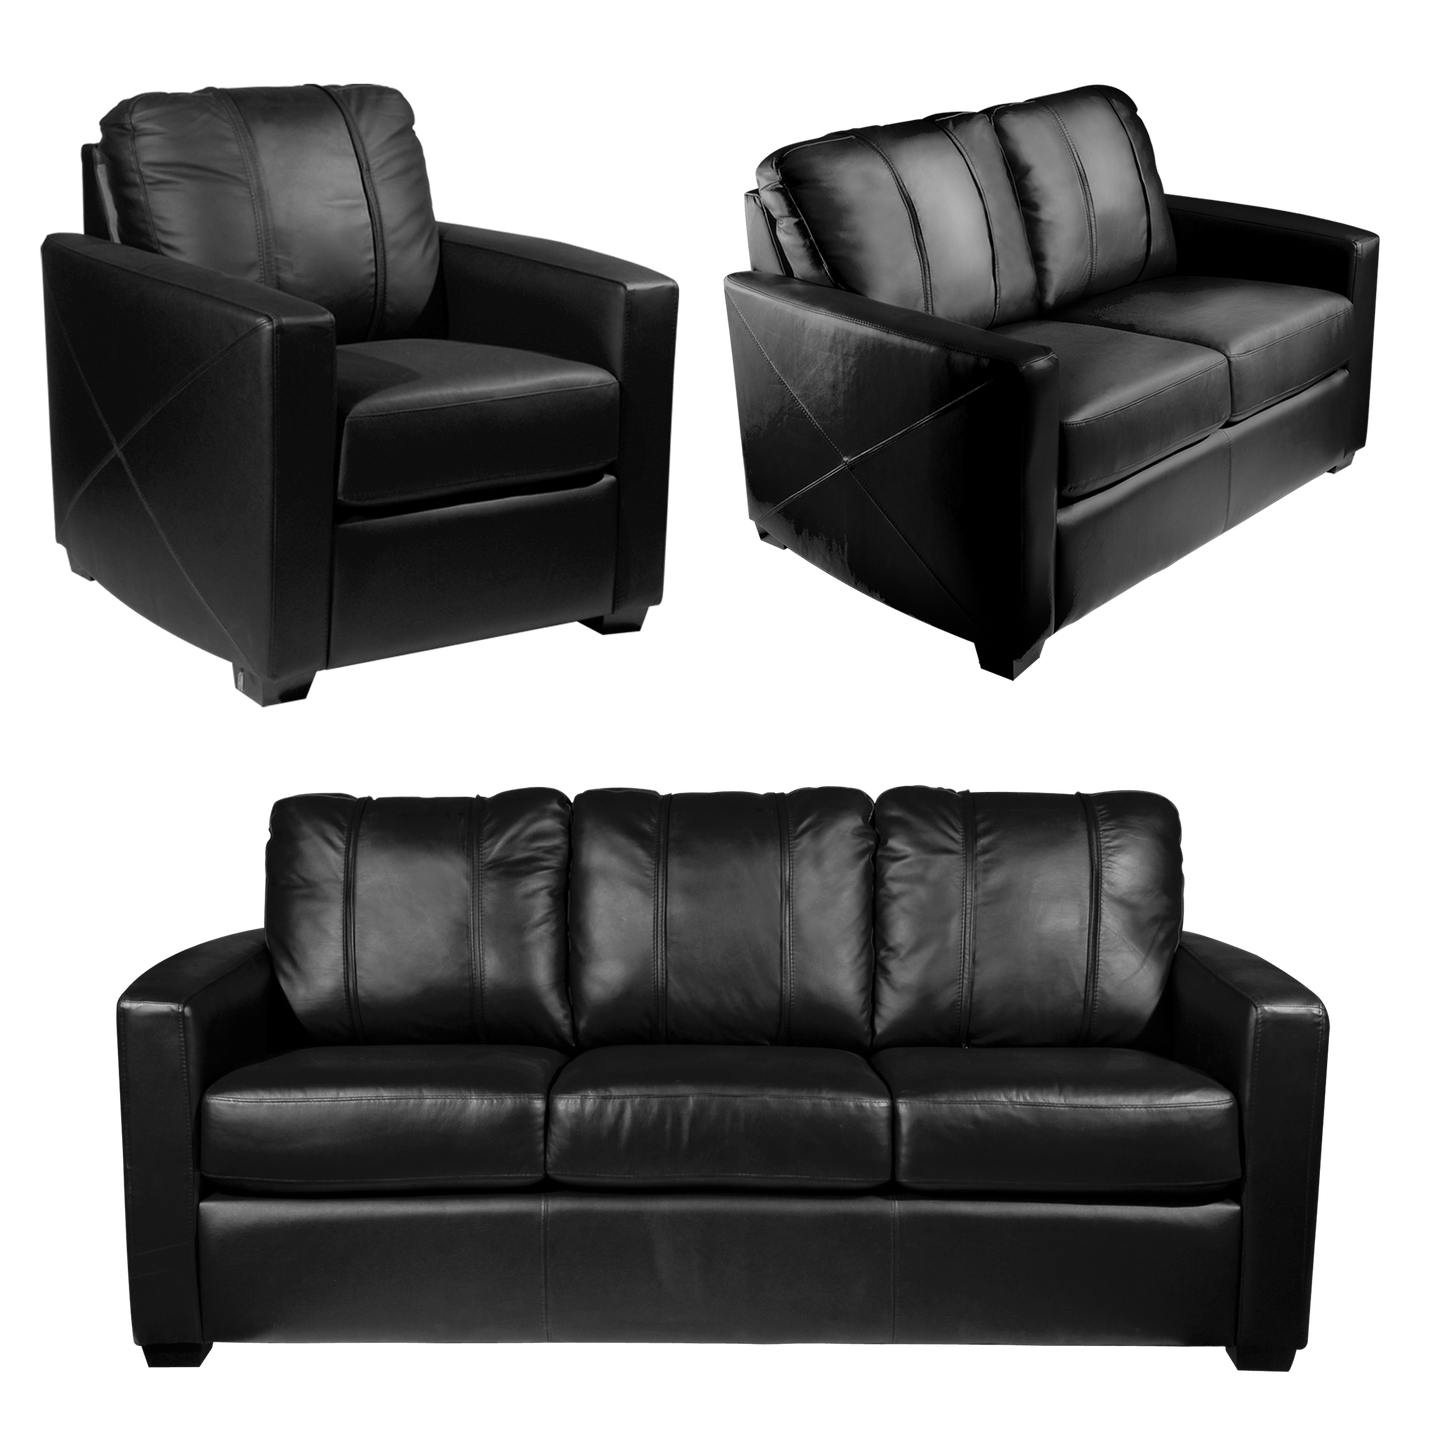 Stationary Seating Collection Commercial Grade Black Upholstery Without Logo